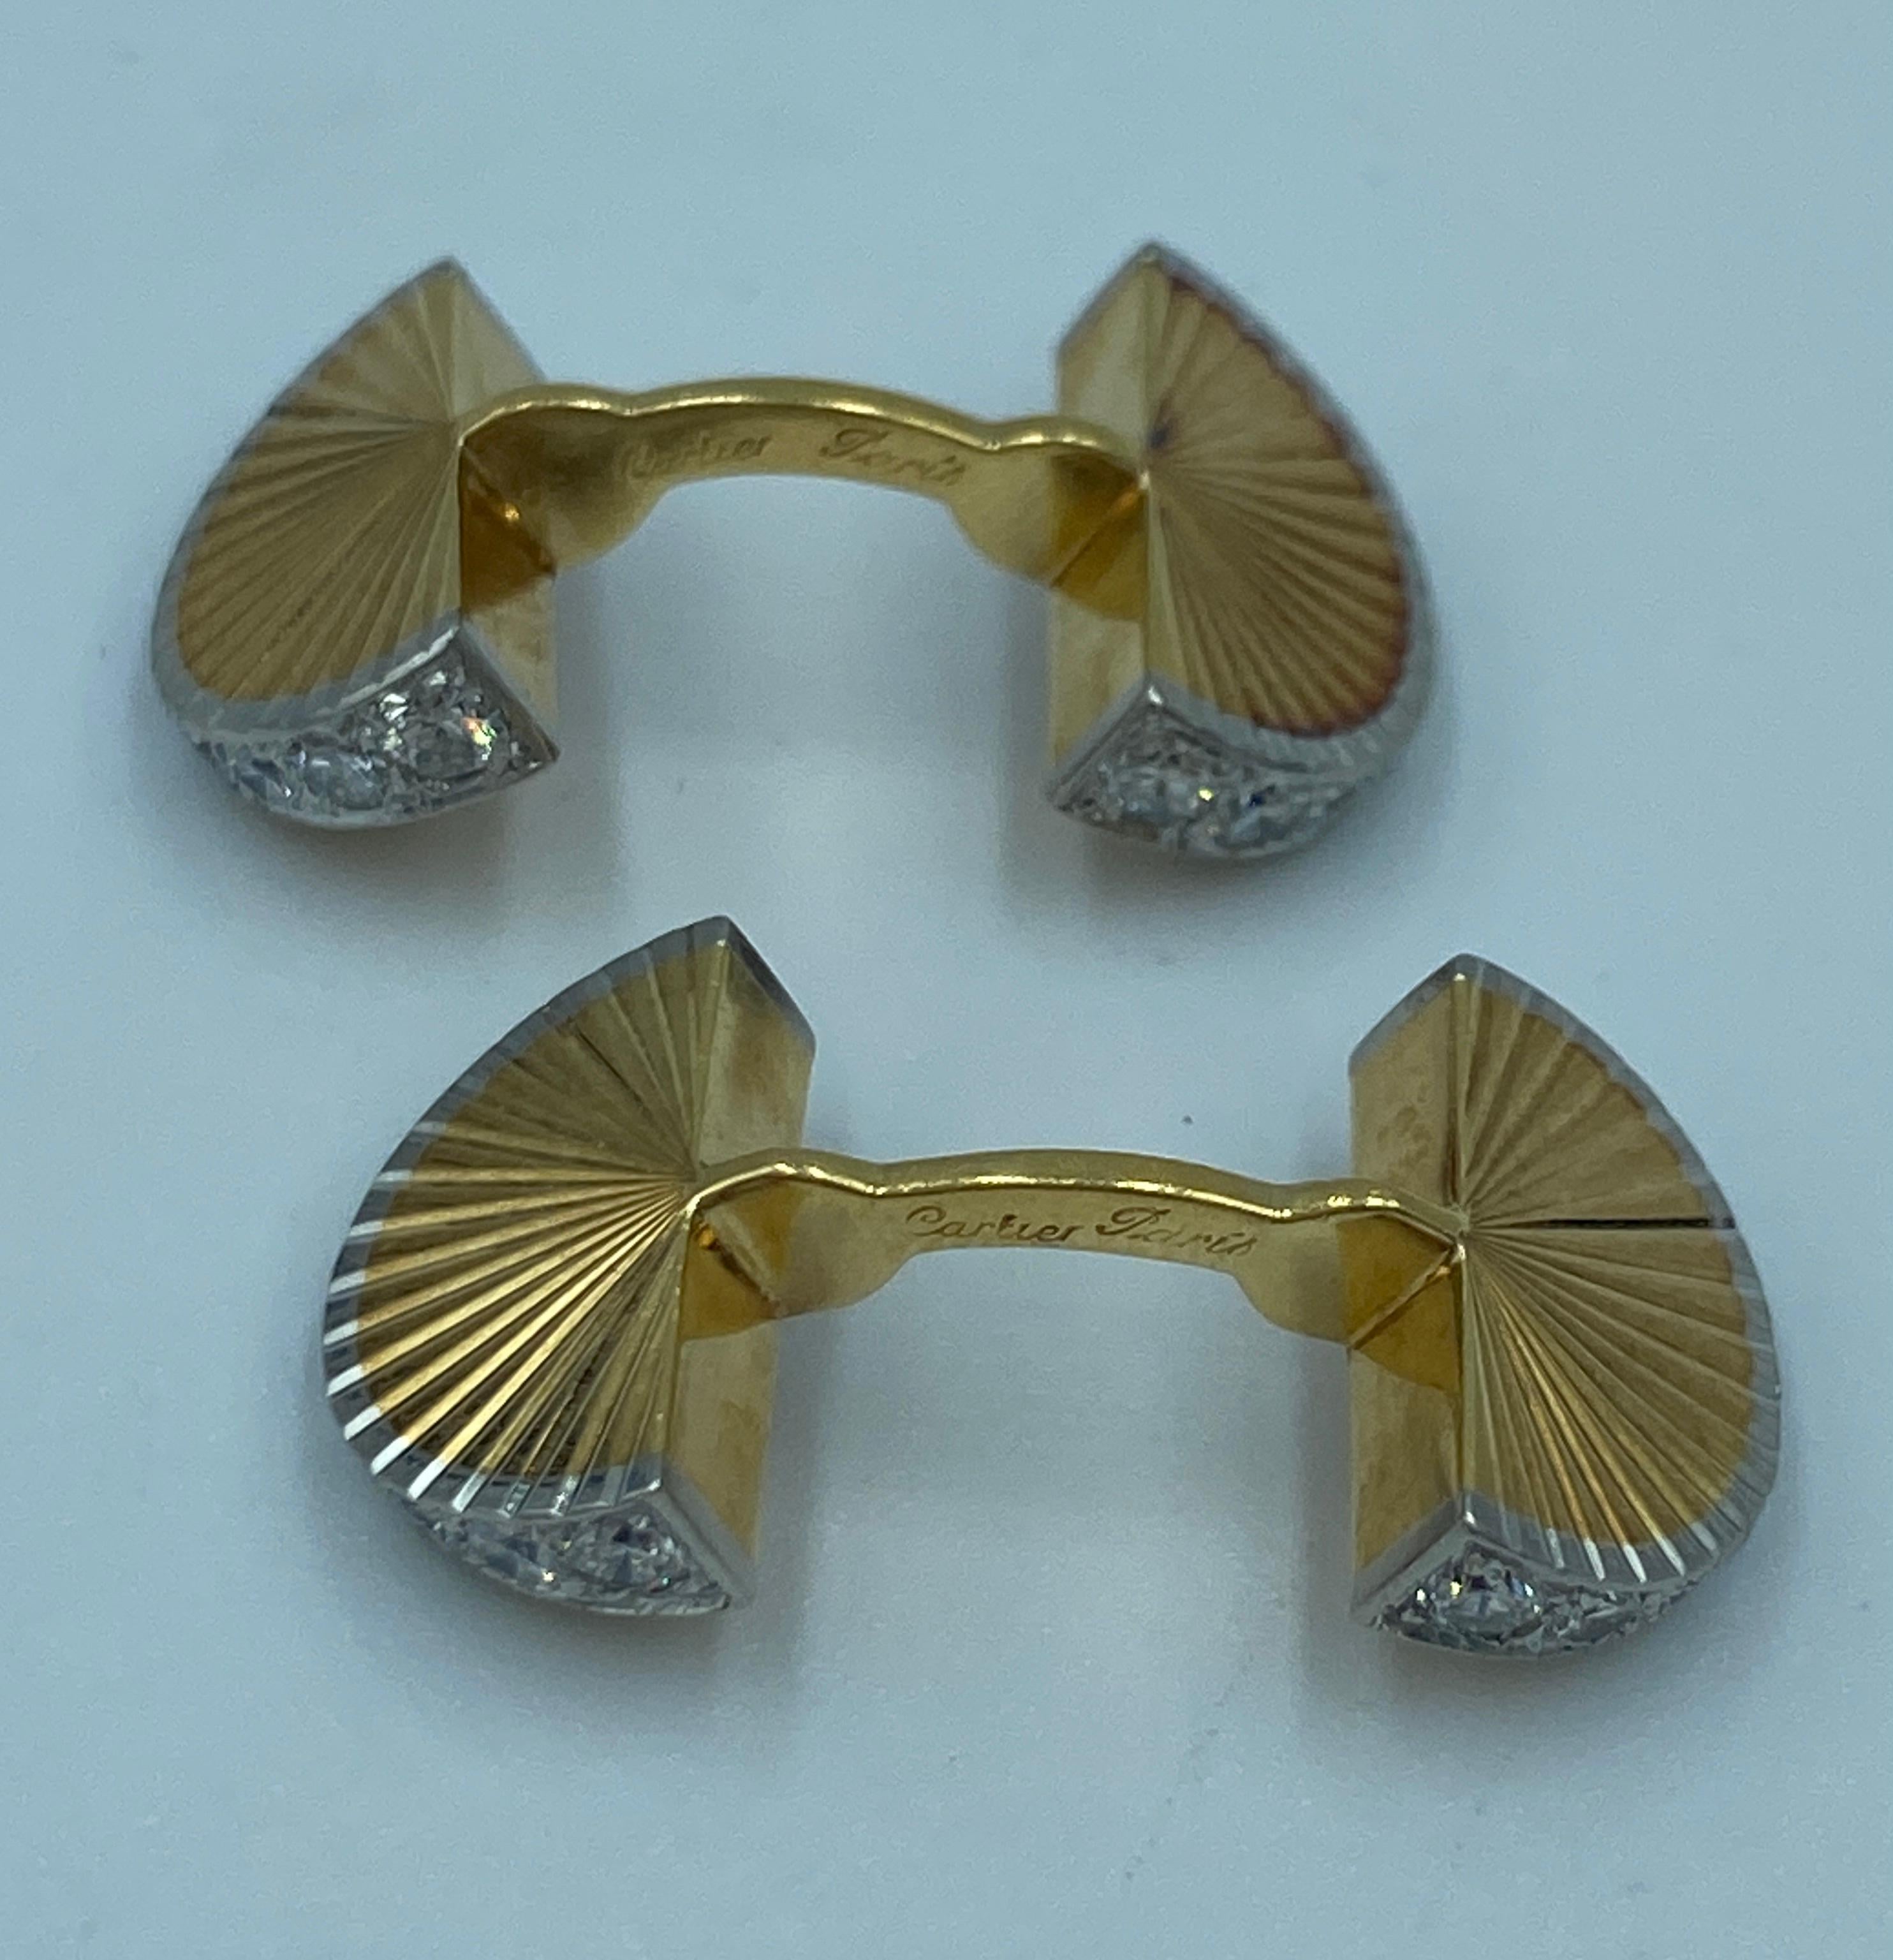 A stunning pair of solid double sided cufflinks in 18k gold both ends of which are adorned with round cut diamonds. The cufflinks are in the shape of 2 fans connected by a stiff bar. They are signed by Cartier of Paris and fitted in a Cartier box.